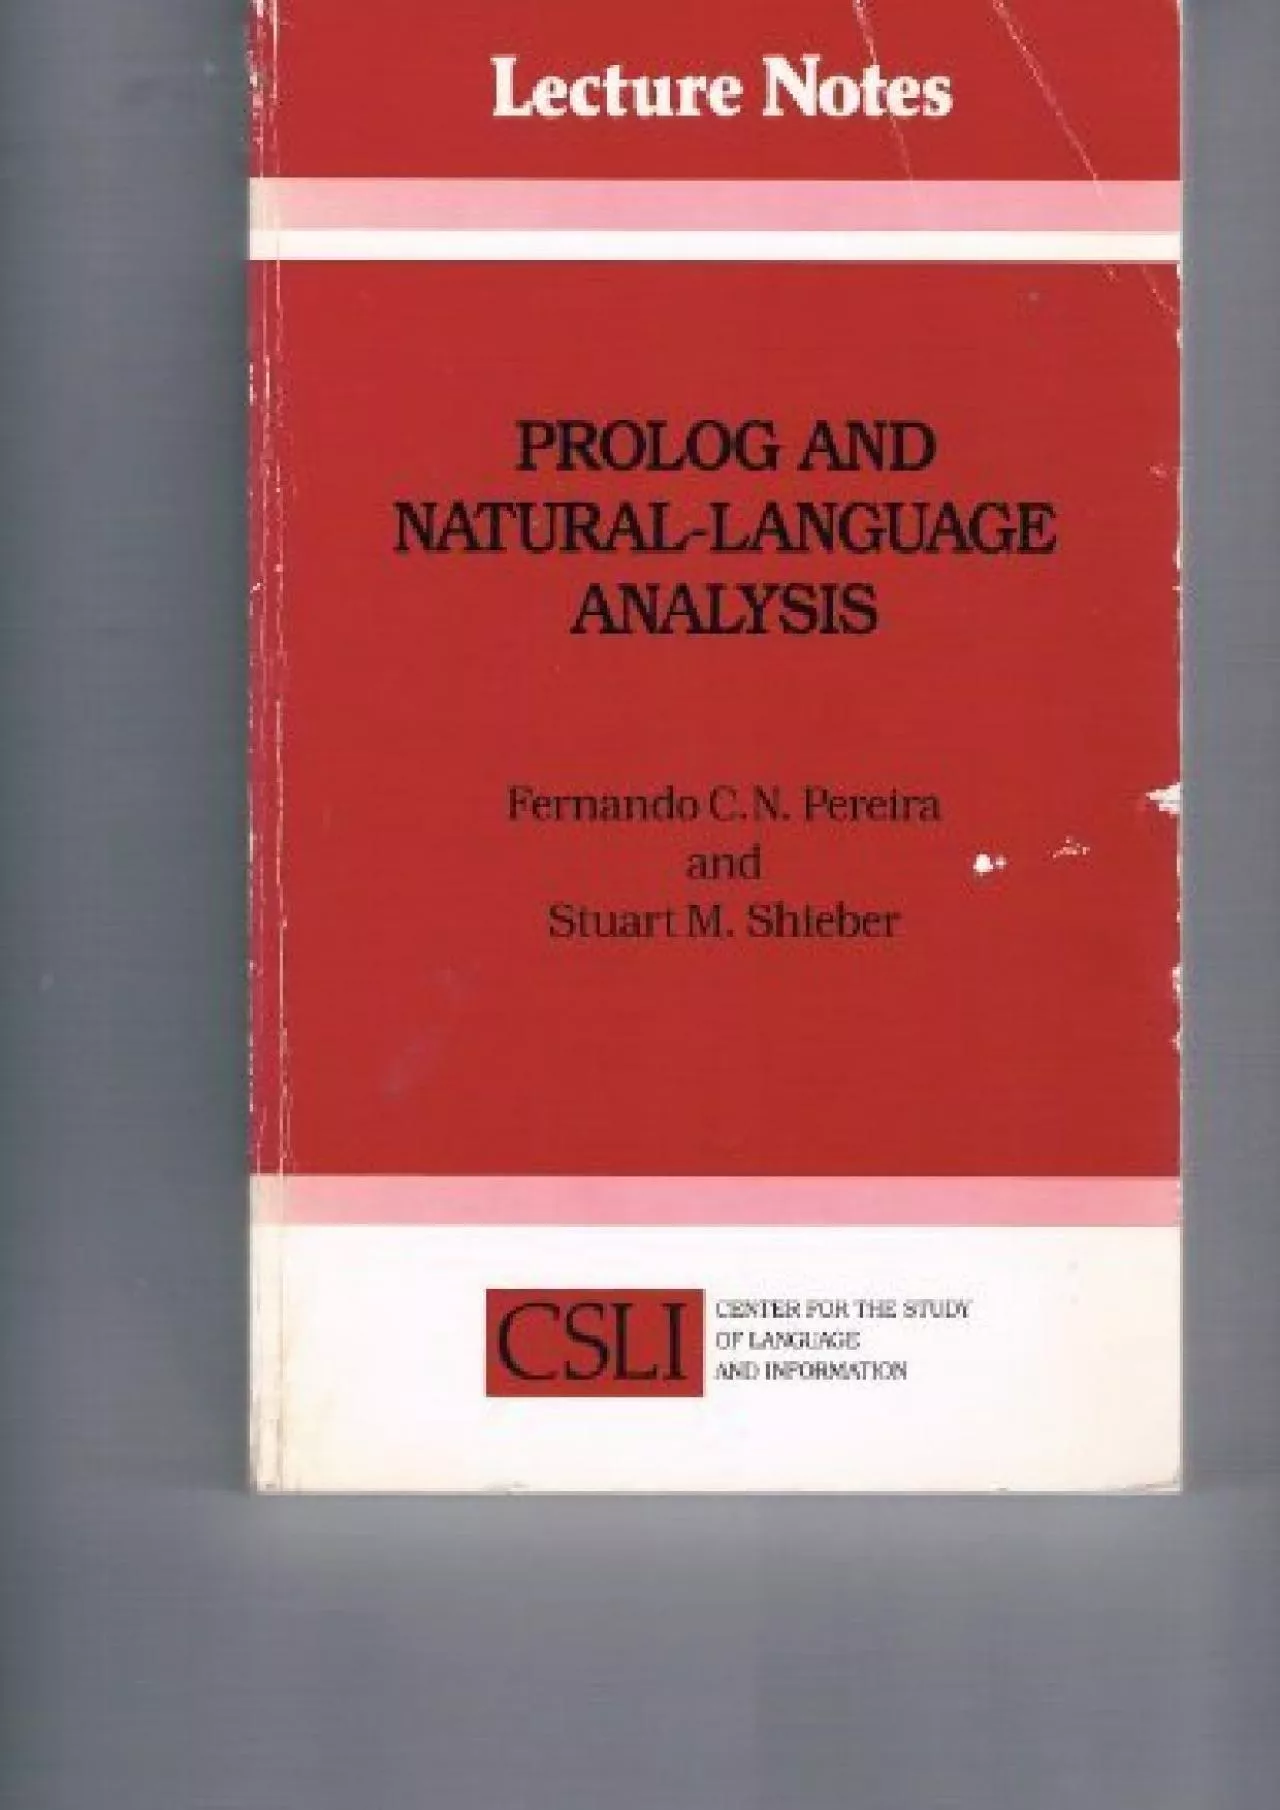 [DOWLOAD]-Prolog and Natural-Language Analysis (Center for the Study of Language and Information